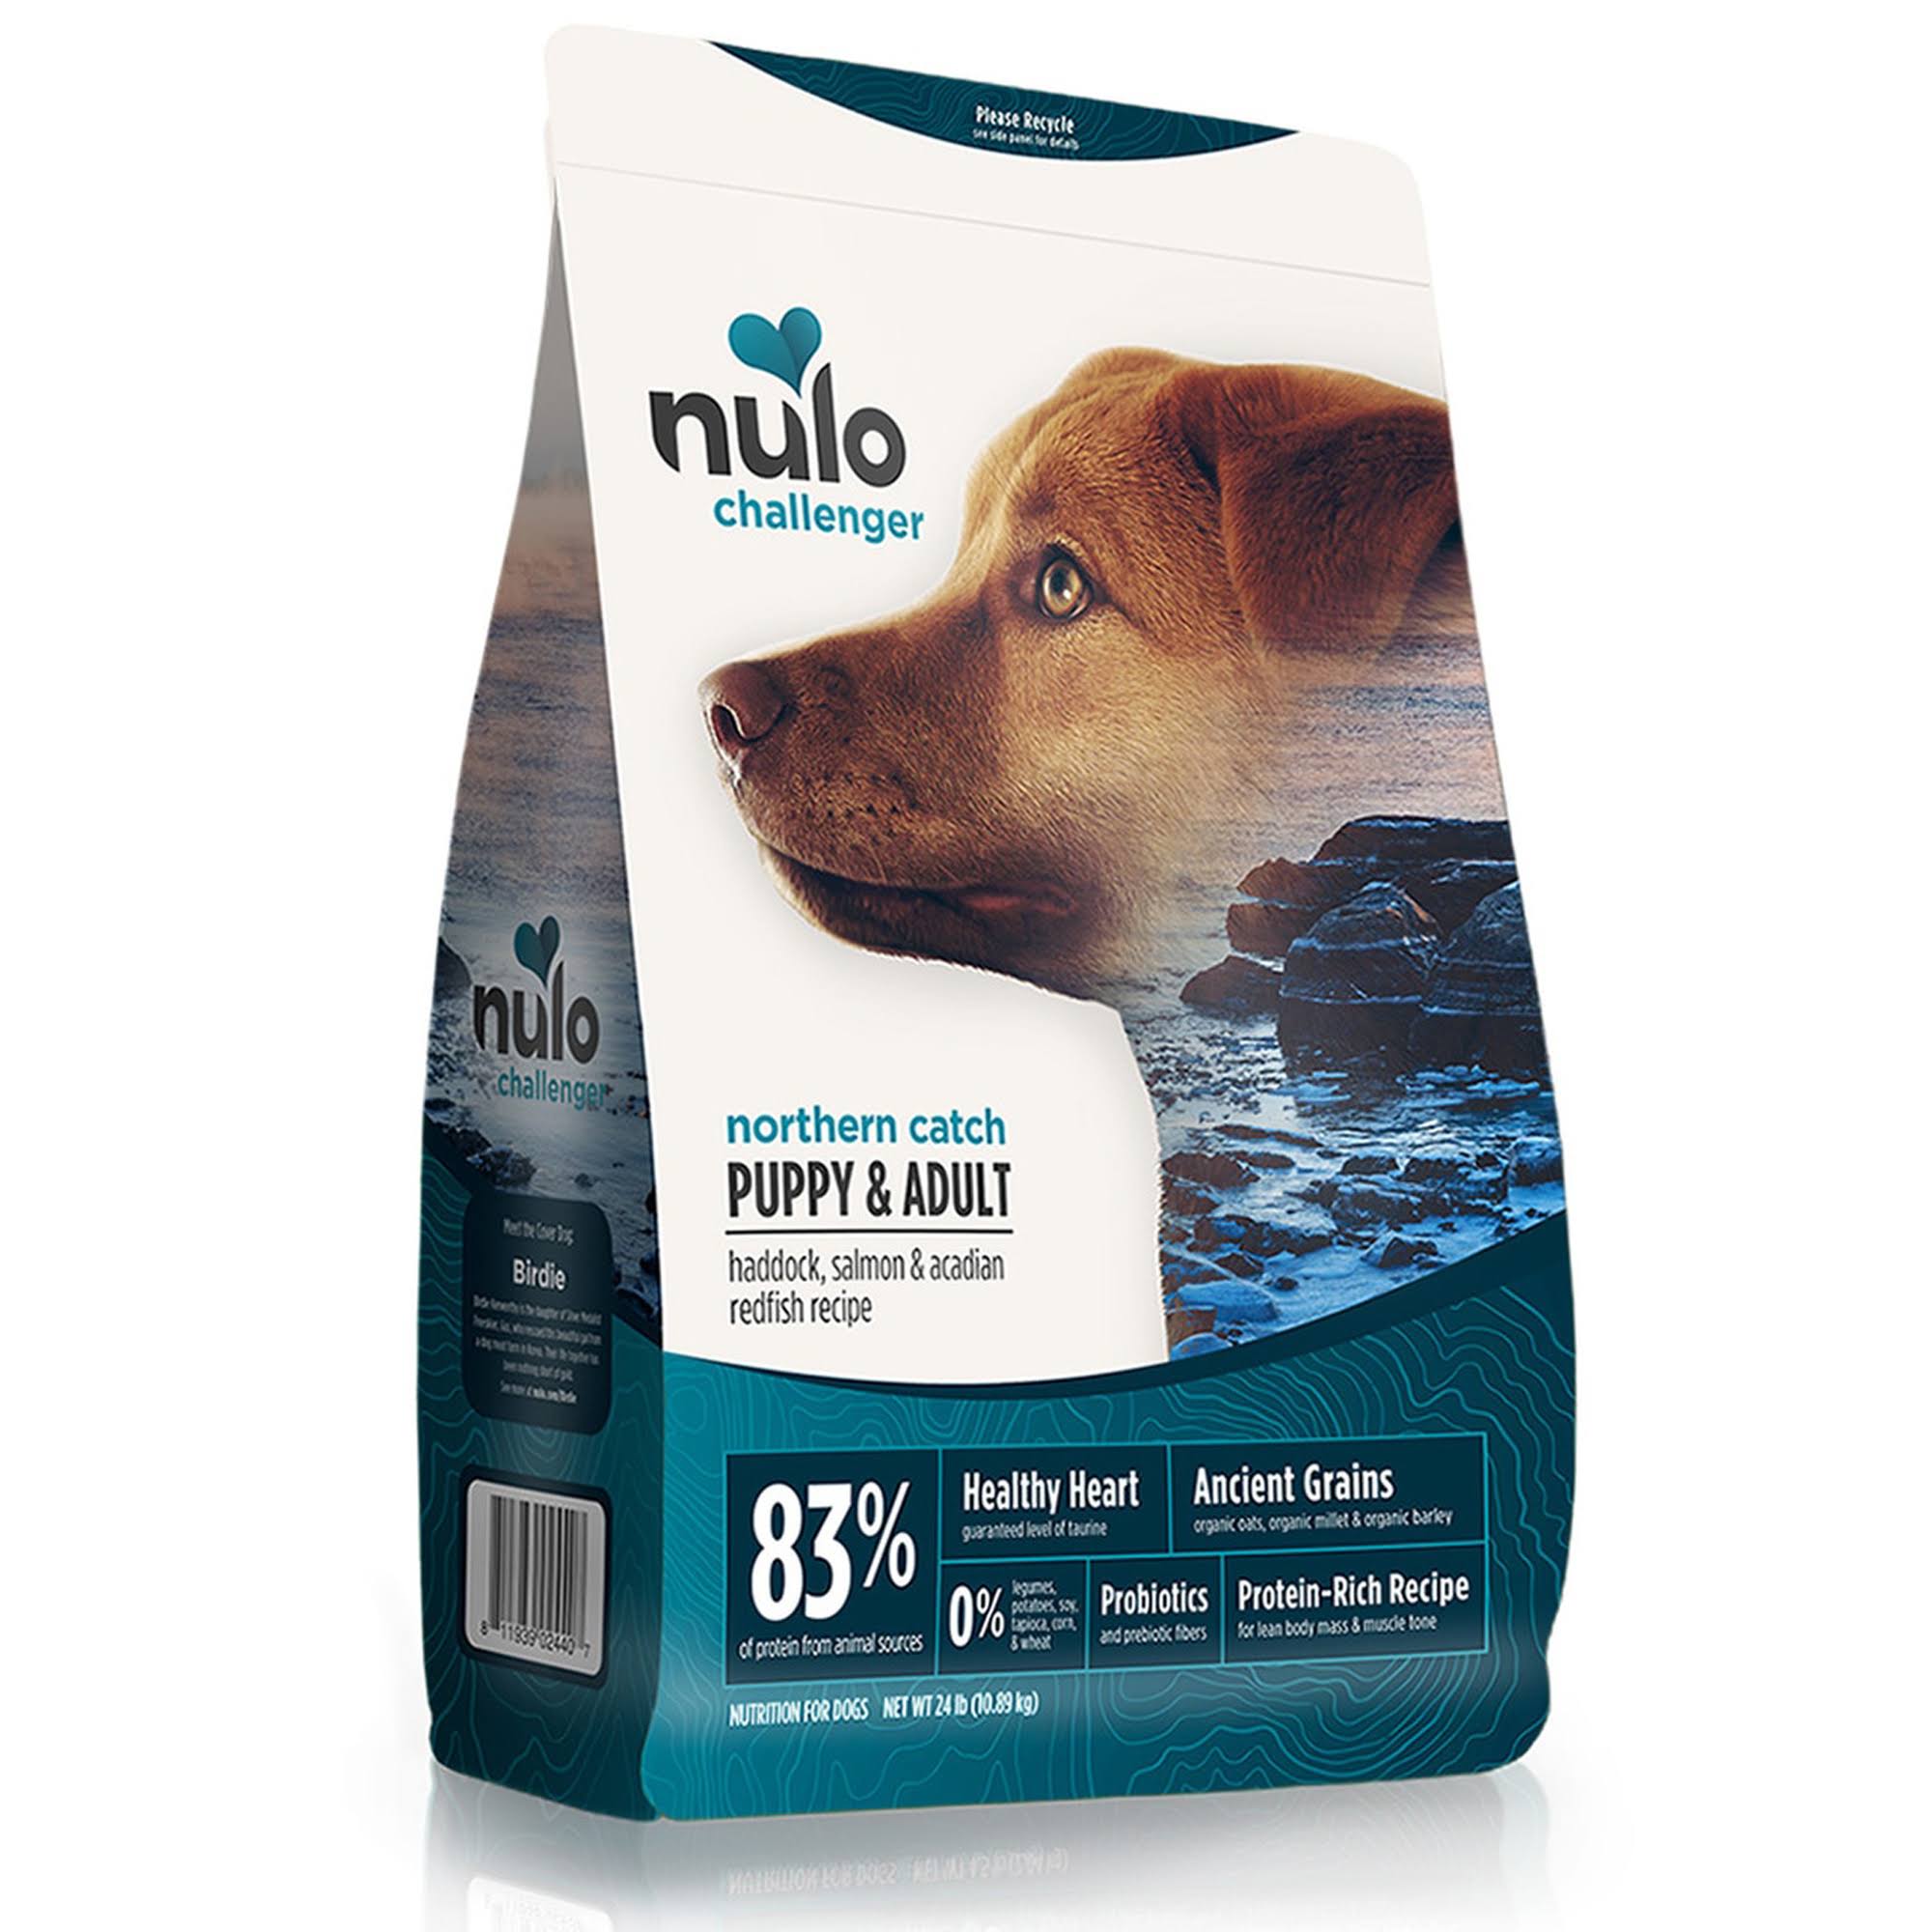 Nulo Challenger Northern Catch Haddock, Salmon & Redfish Dry Dog Food, 11 Pounds